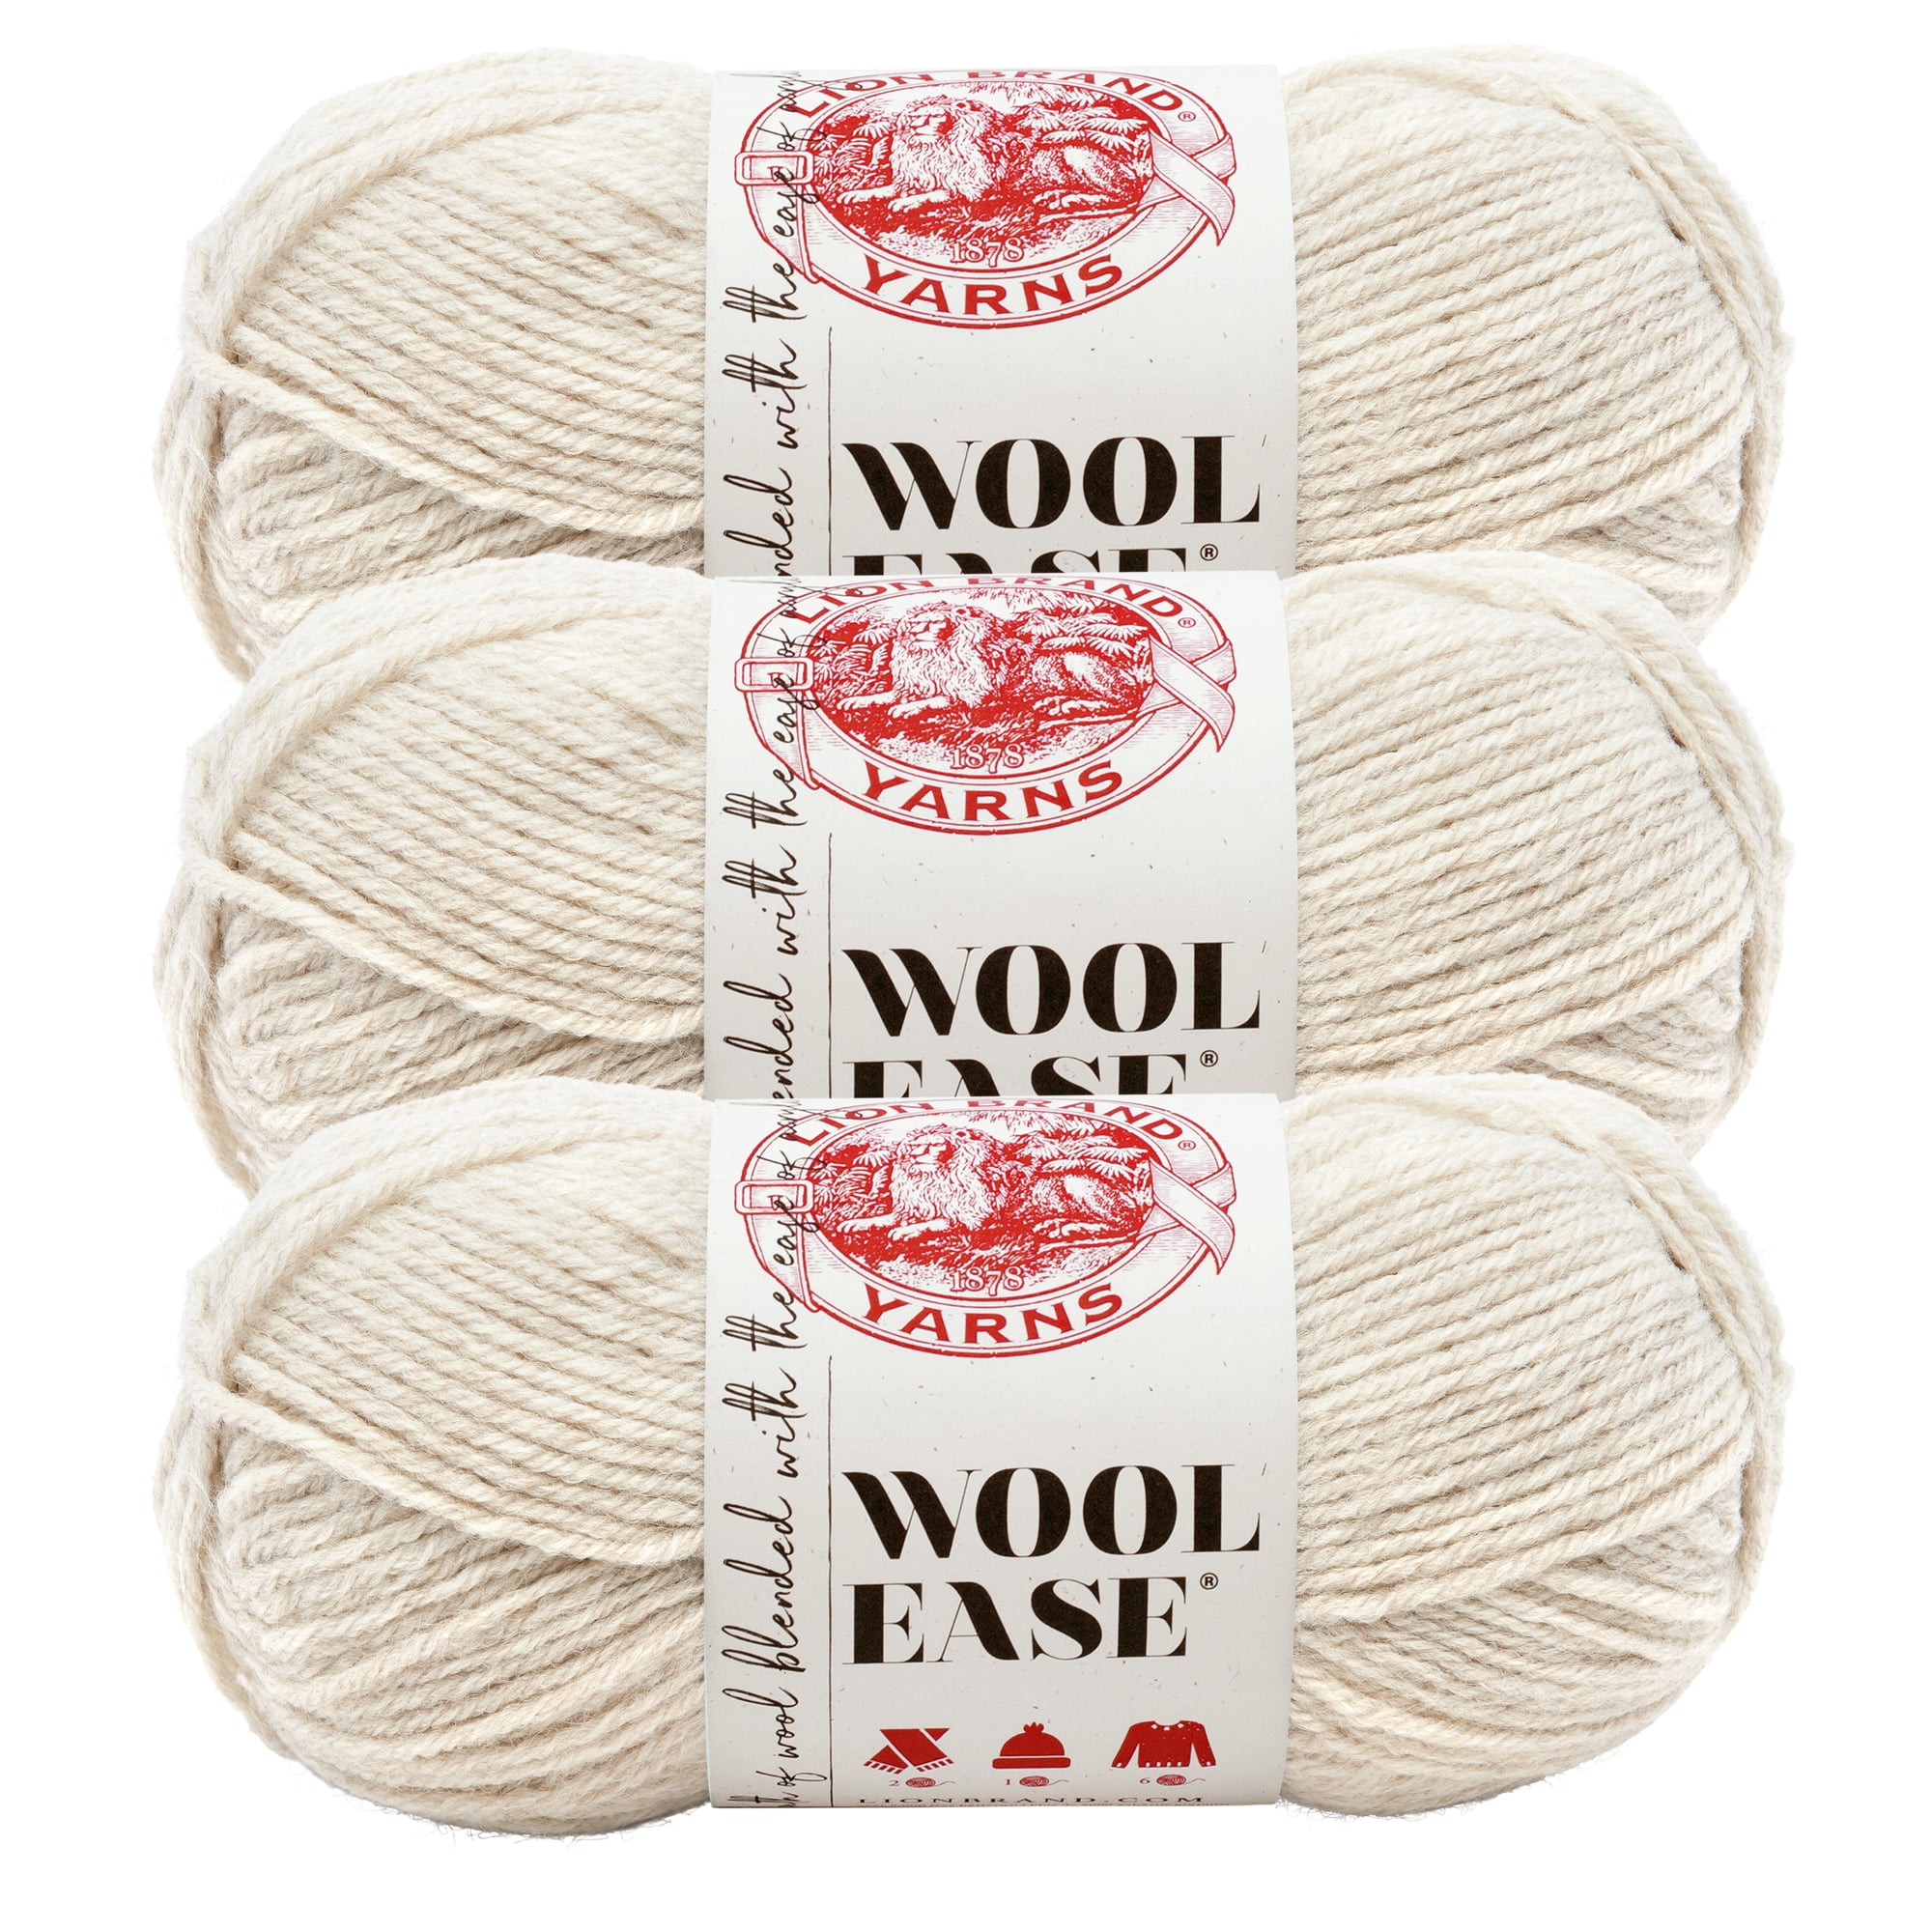 Lion Brand Yarn Wool-Ease Thick & Quick Yarn, Soft and Bulky Yarn for  Knitting, Crocheting, and Crafting, 3 Pack, Succulent : : Home &  Kitchen